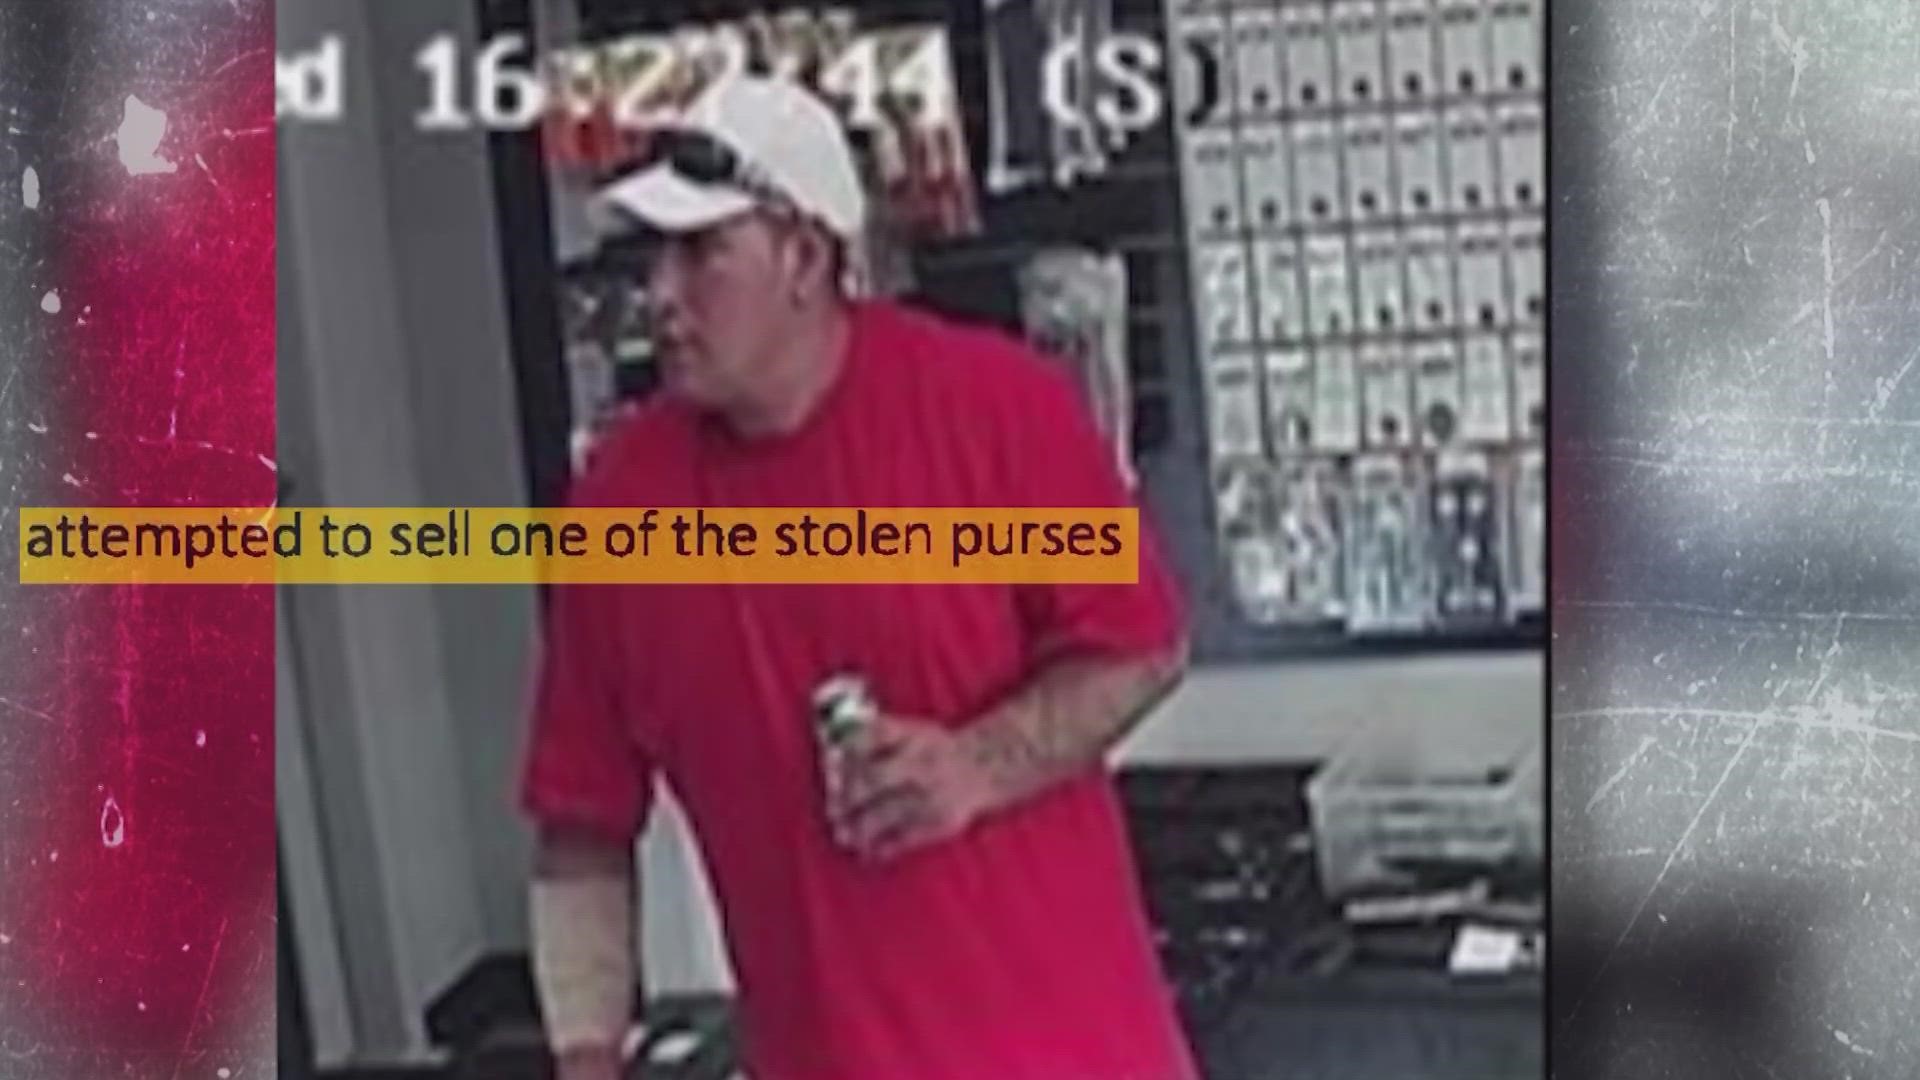 The man is connected to nine thefts of mainly high-end handbag, but police say he left a big clue behind when trying to sell some of the loot.